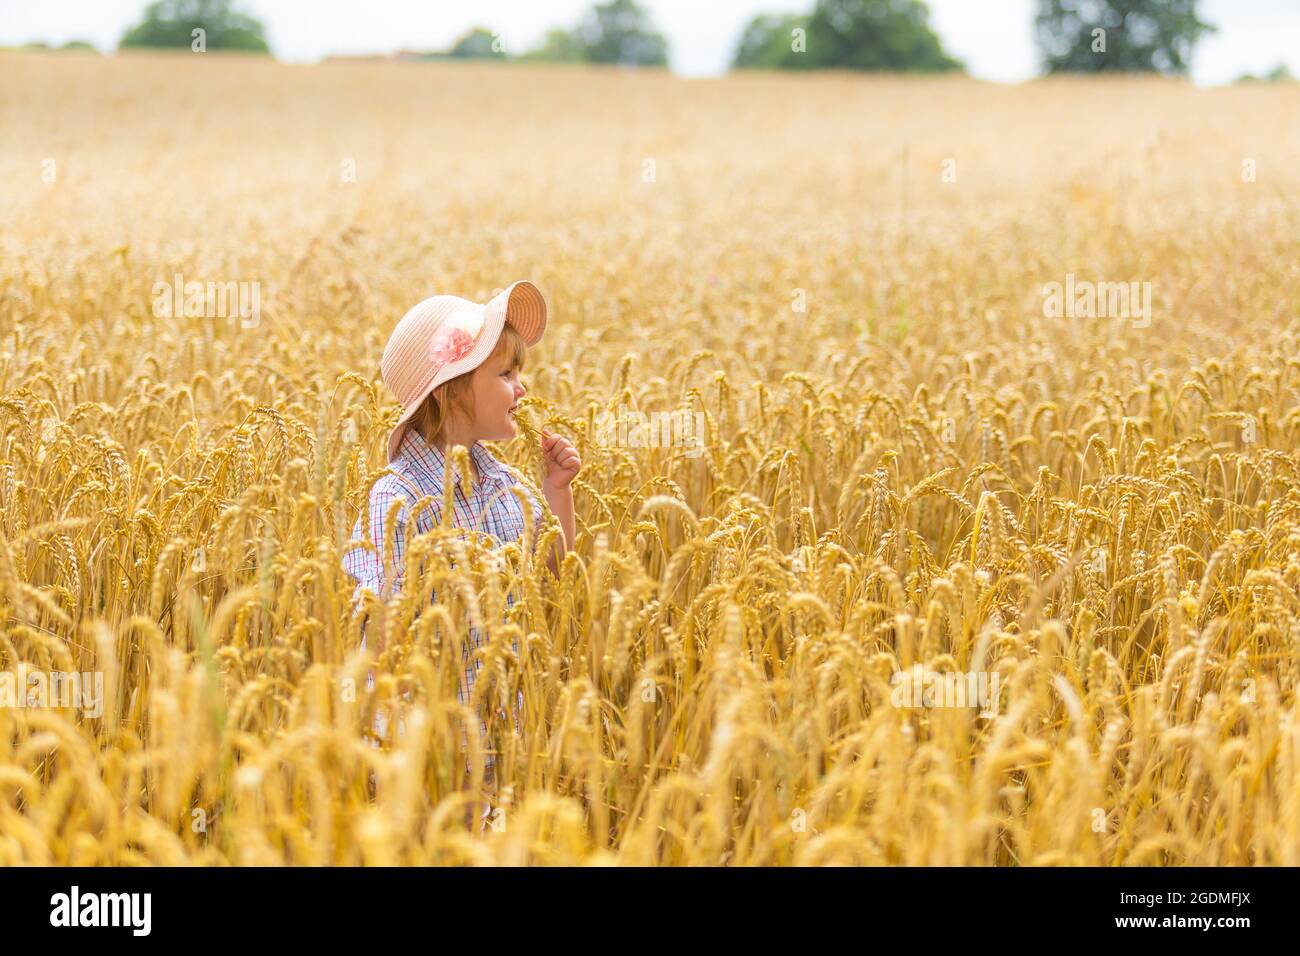 Arley, Worcestershire, UK. 14th Aug, 2021. 2 year old Myla-May Mills enjoys the last few days in her neighbour's wheatfield in Arley, Worcs before harvesting begins. Credit: Peter Lopeman/Alamy Live News Stock Photo